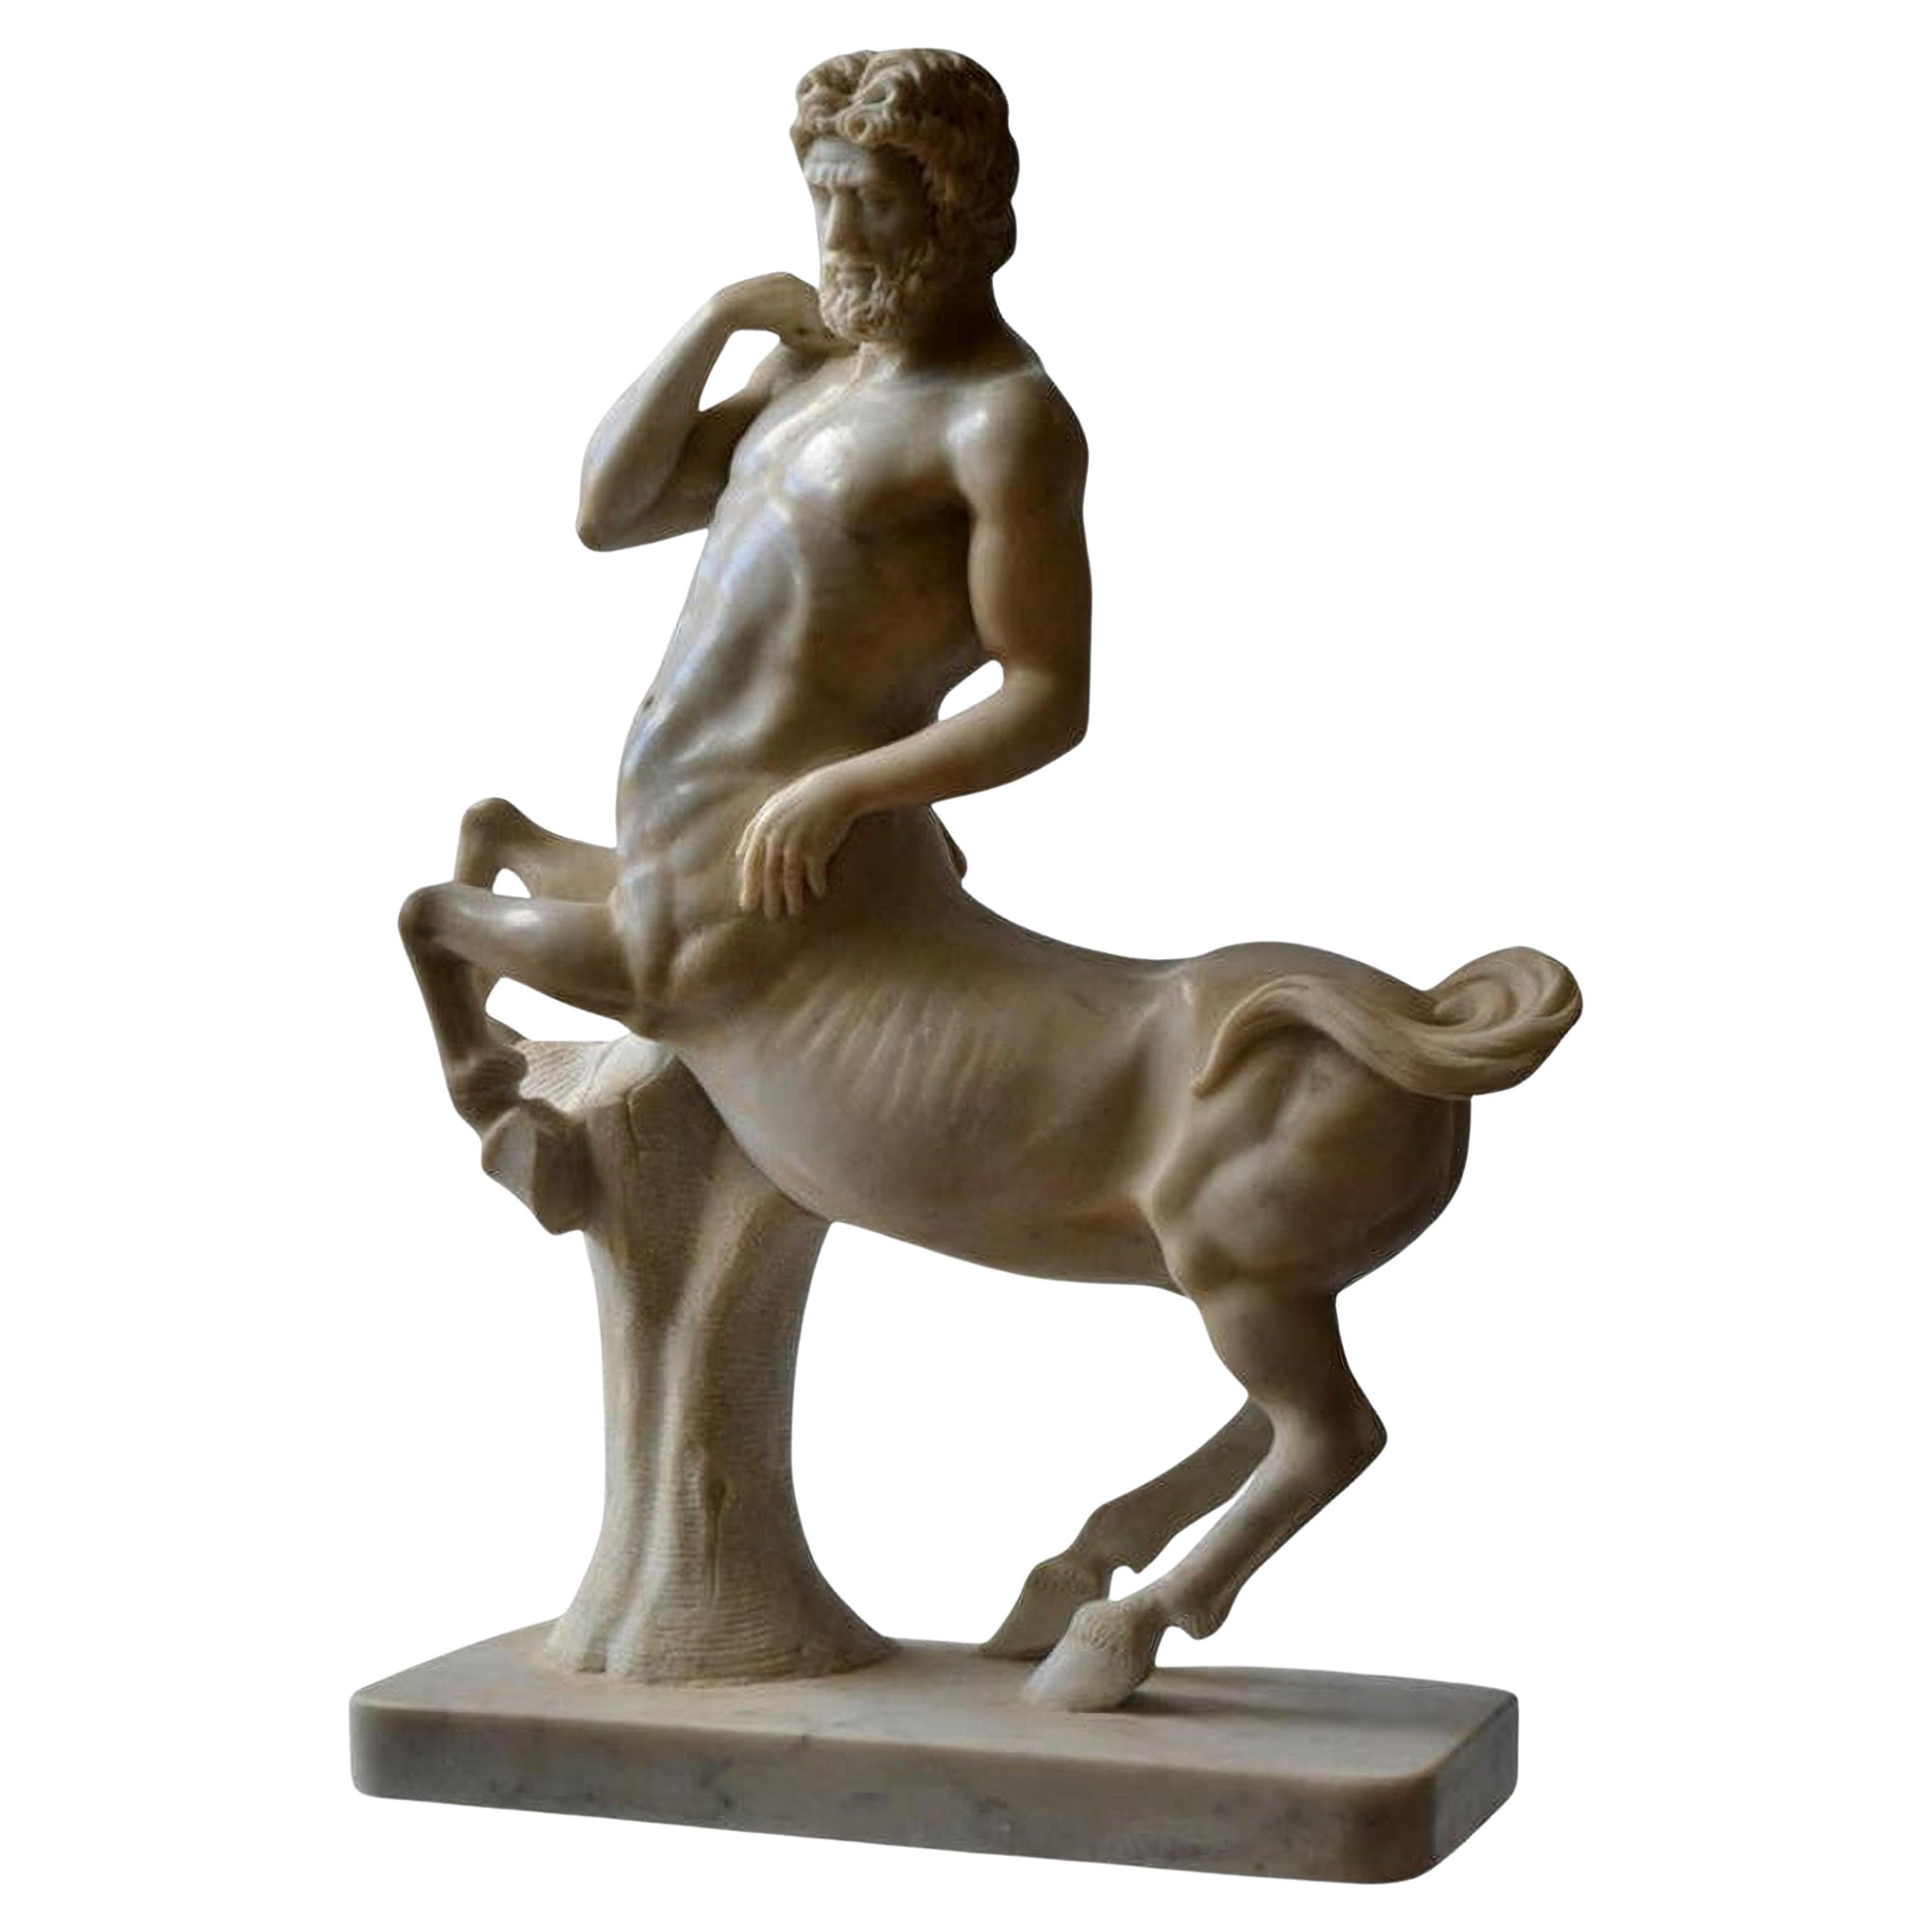 Unique Italian Centaur Sculpture Carved in Carrara Marble Early 20th Century For Sale